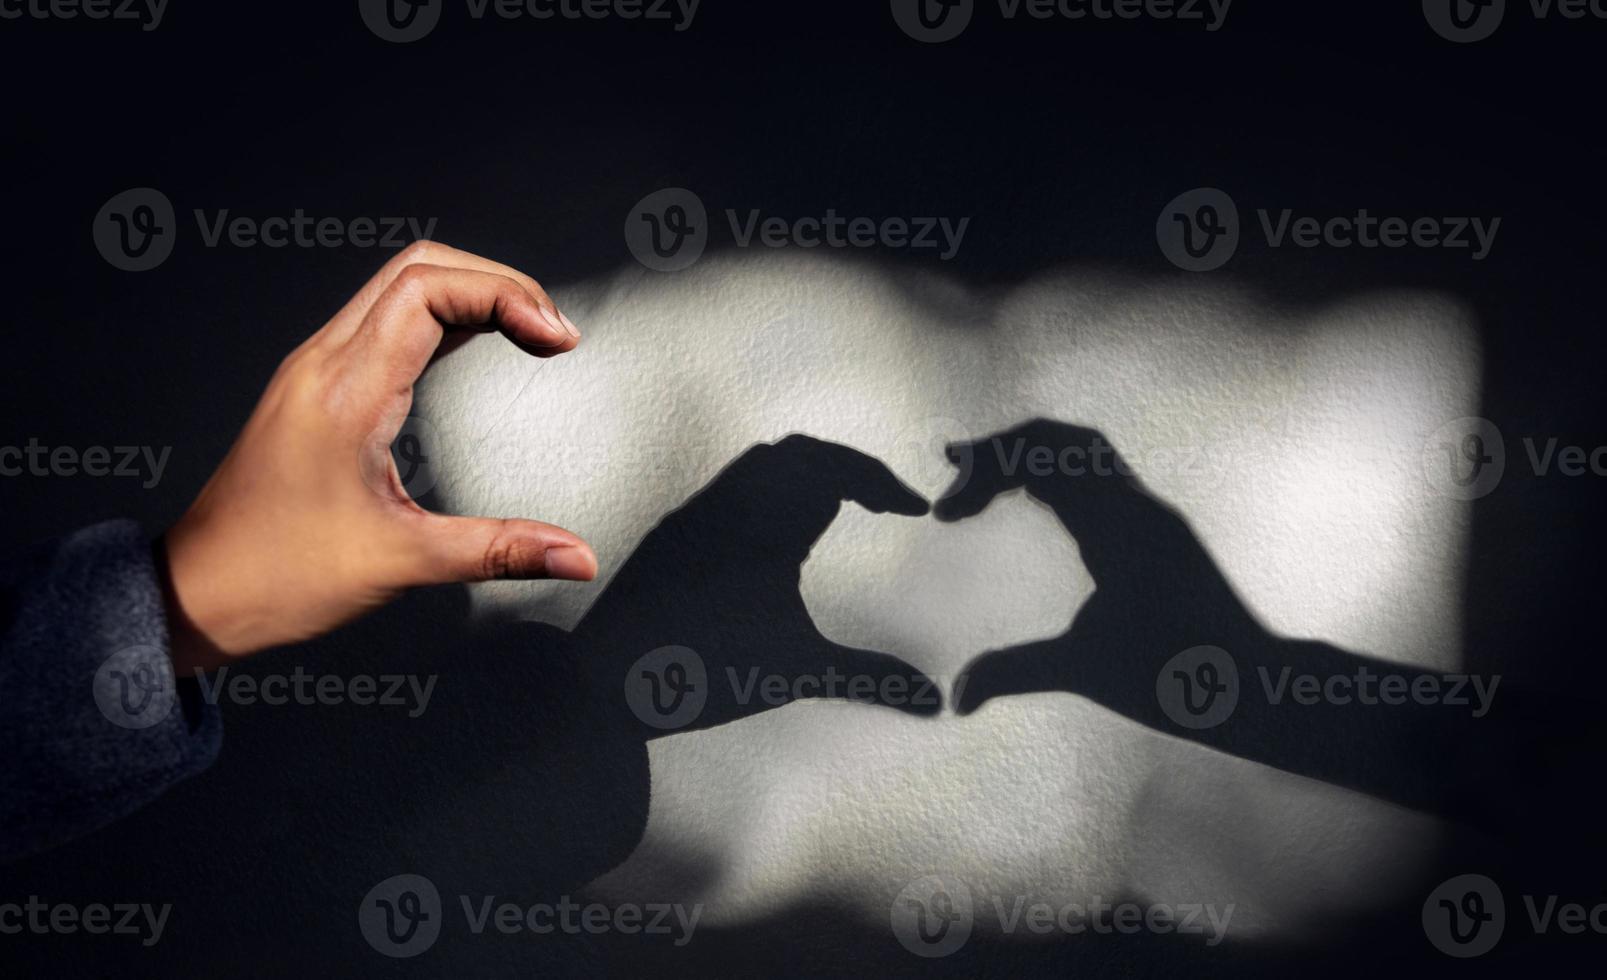 Conceptual Photo for Love and Relationship. Loneliness Person Using Gesture Hand to form a Heart Shape Shadow on the Wall. Hope for Matching someone